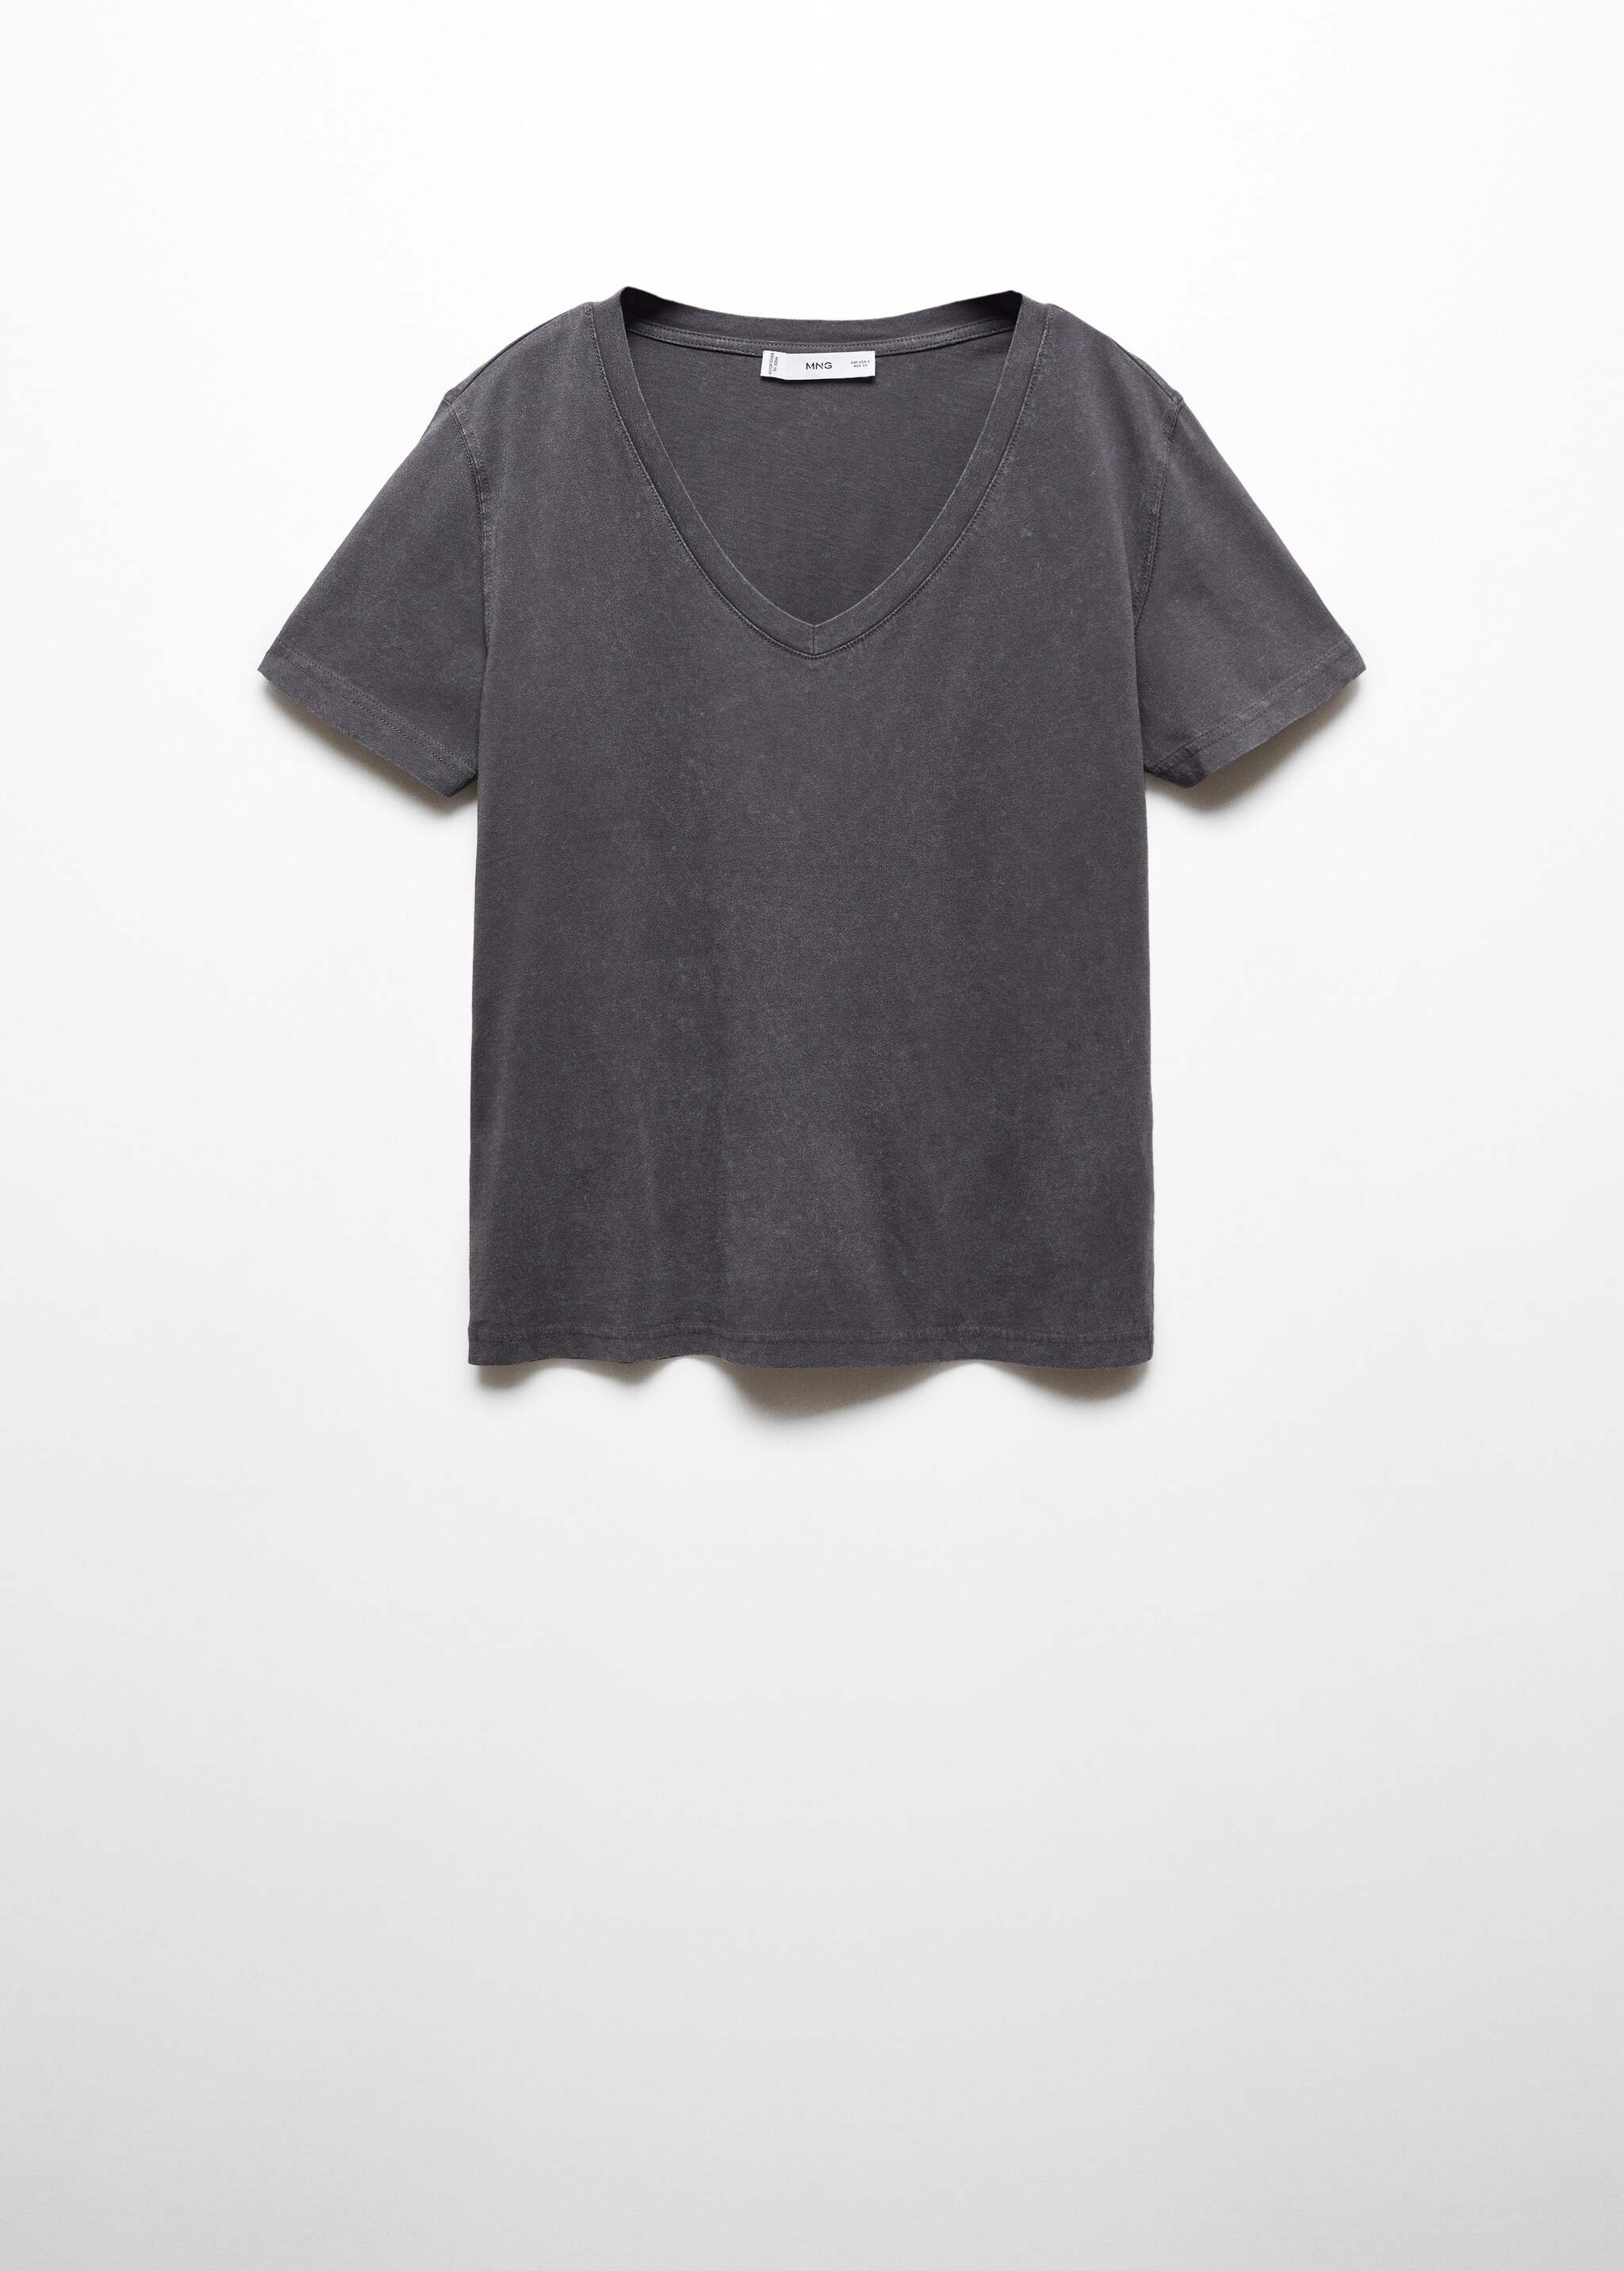 Washed cotton t-shirt - Article without model